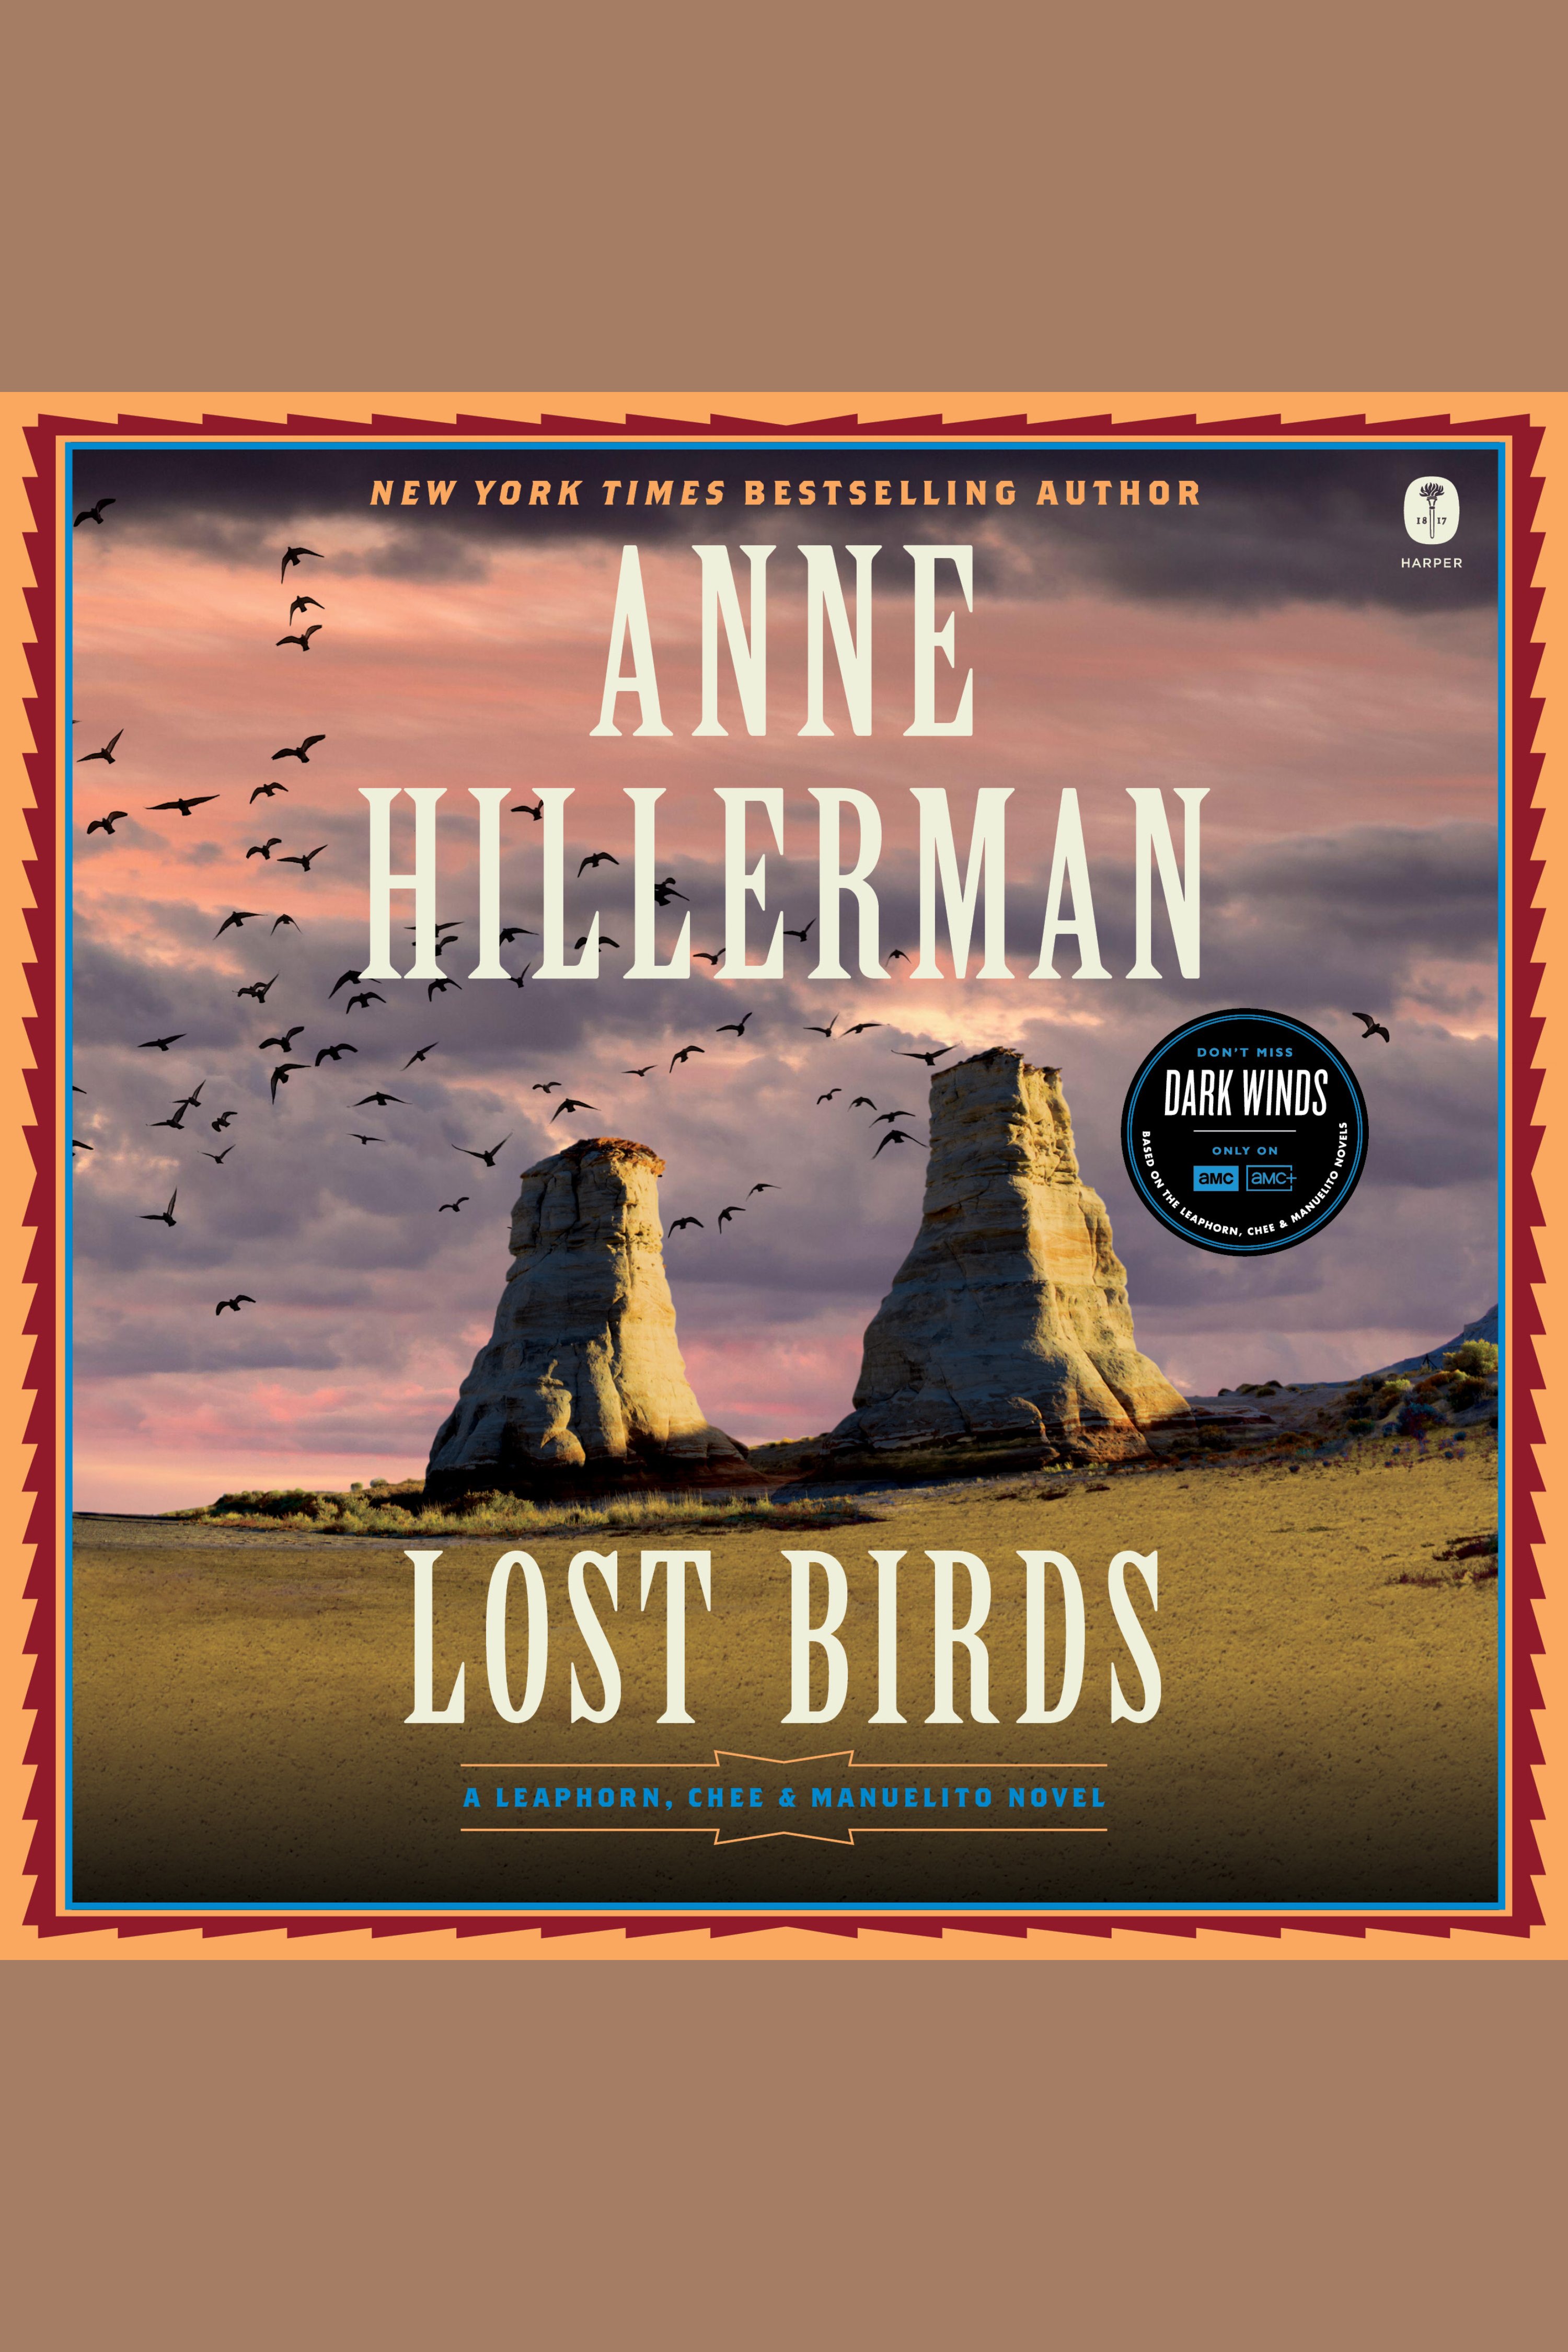 Lost Birds A Leaphorn, Chee & Manuelito Novel cover image